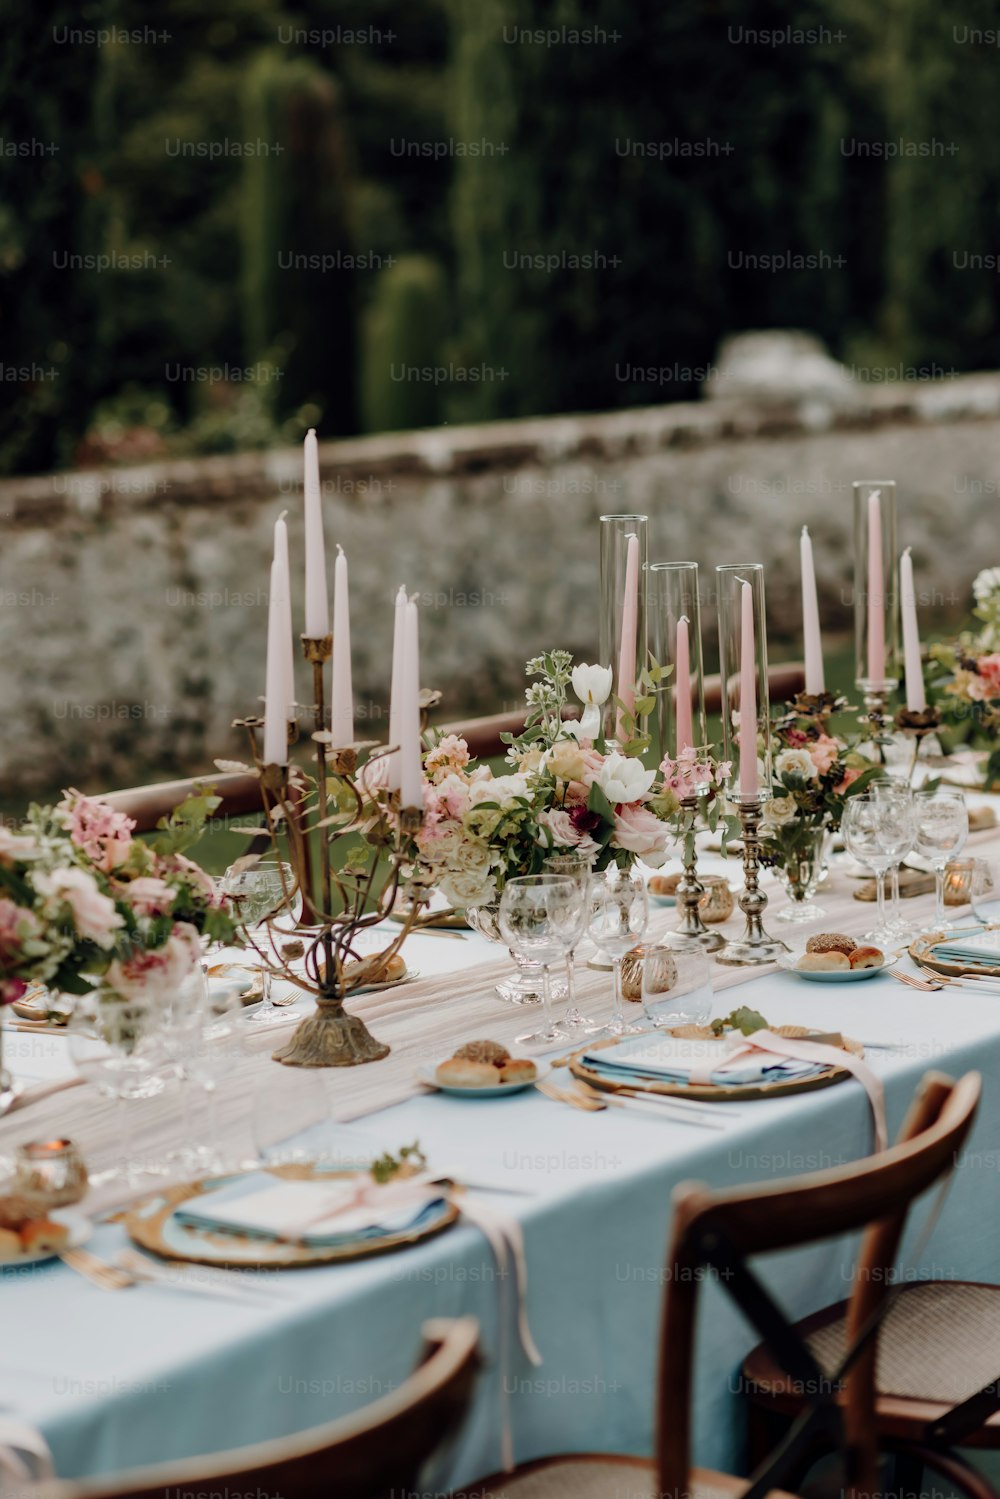 a long table with a blue table cloth and flowers on it